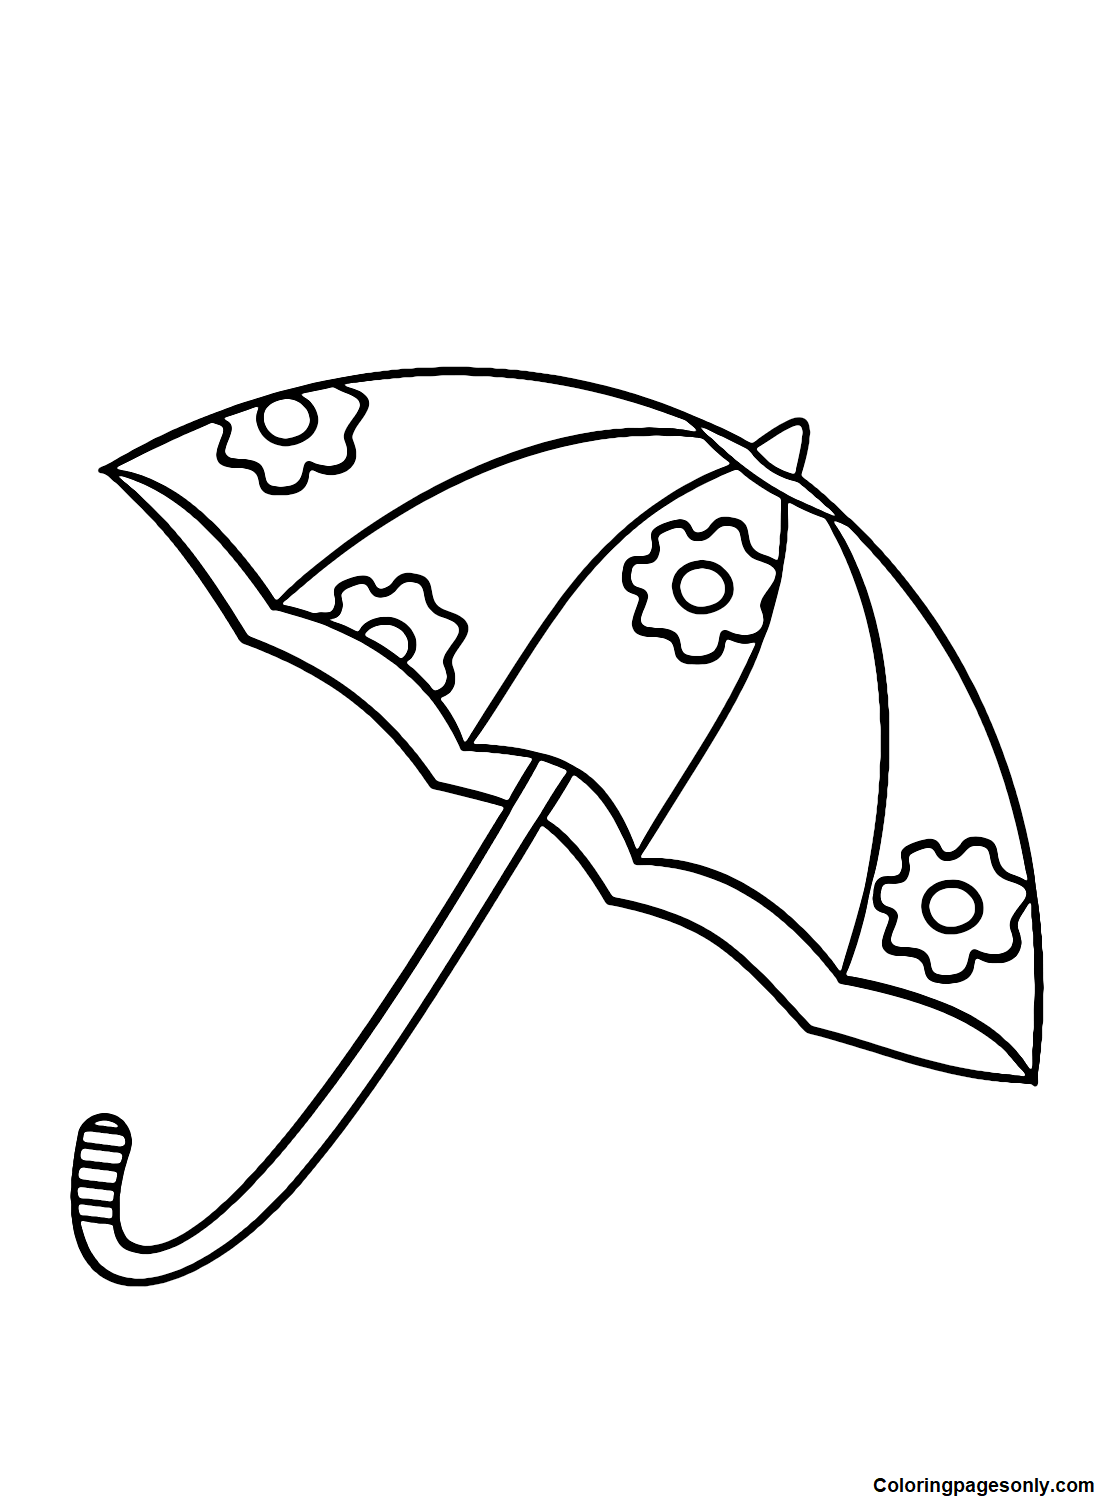 Umbrella with Flower Coloring Page